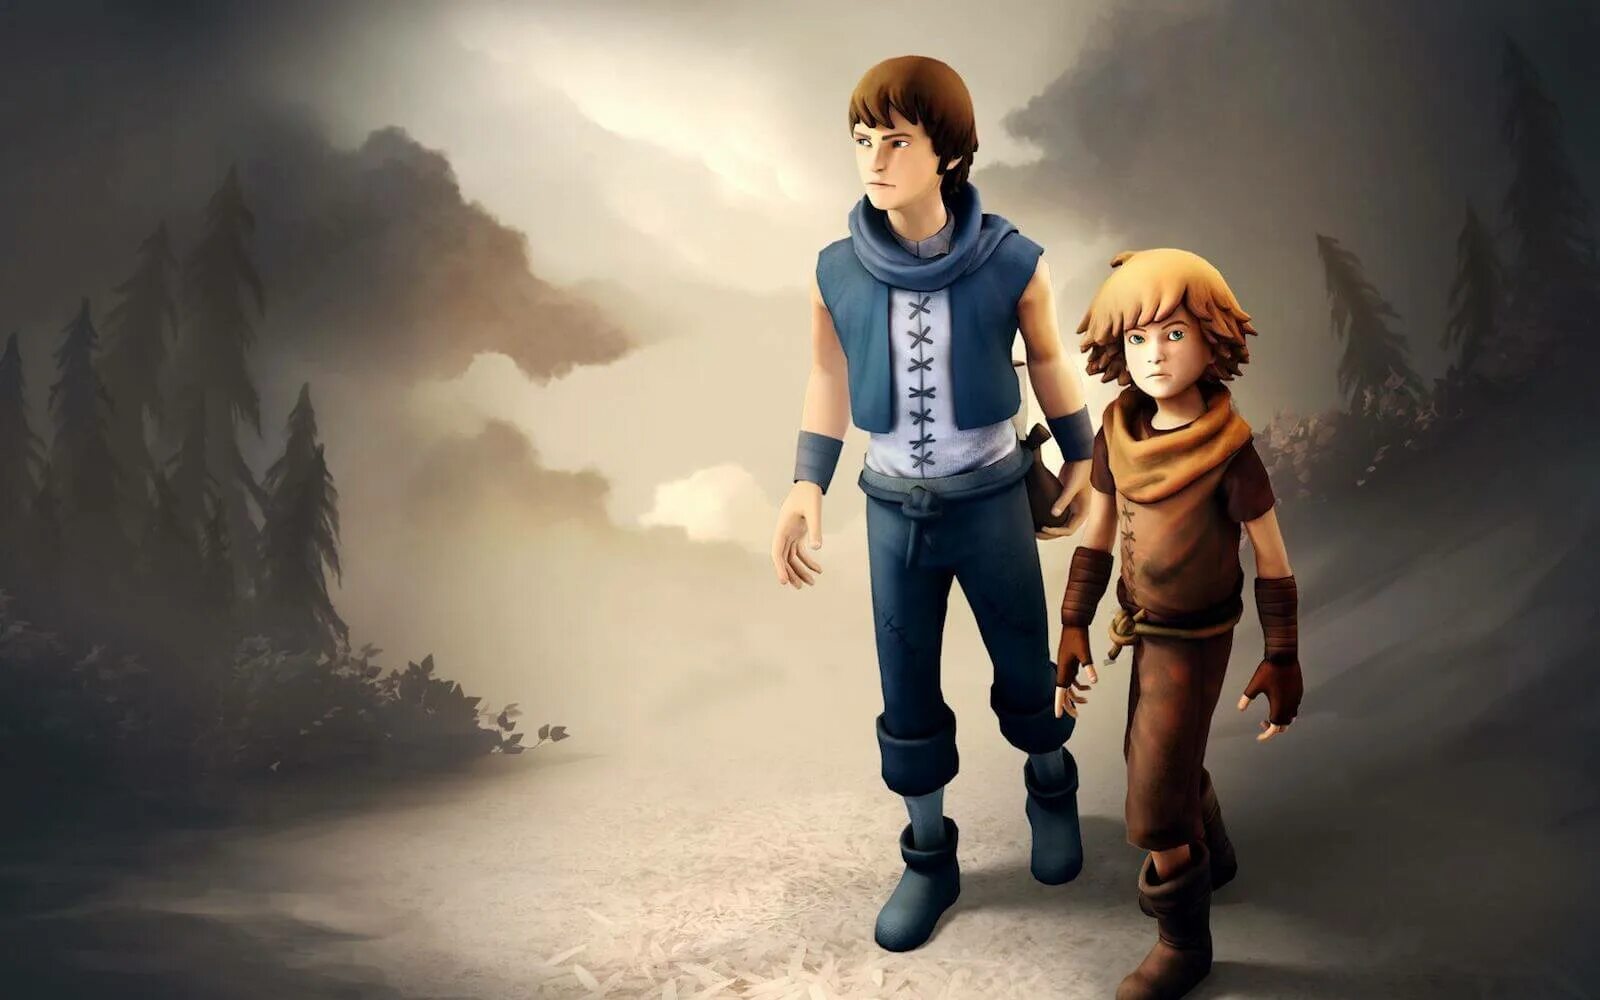 Brothers: a Tale of two sons. Two brothers игра. Brothers: a Tale of two sons (2013). Brothers a Tale of two sons Скриншоты. A tale of two песня